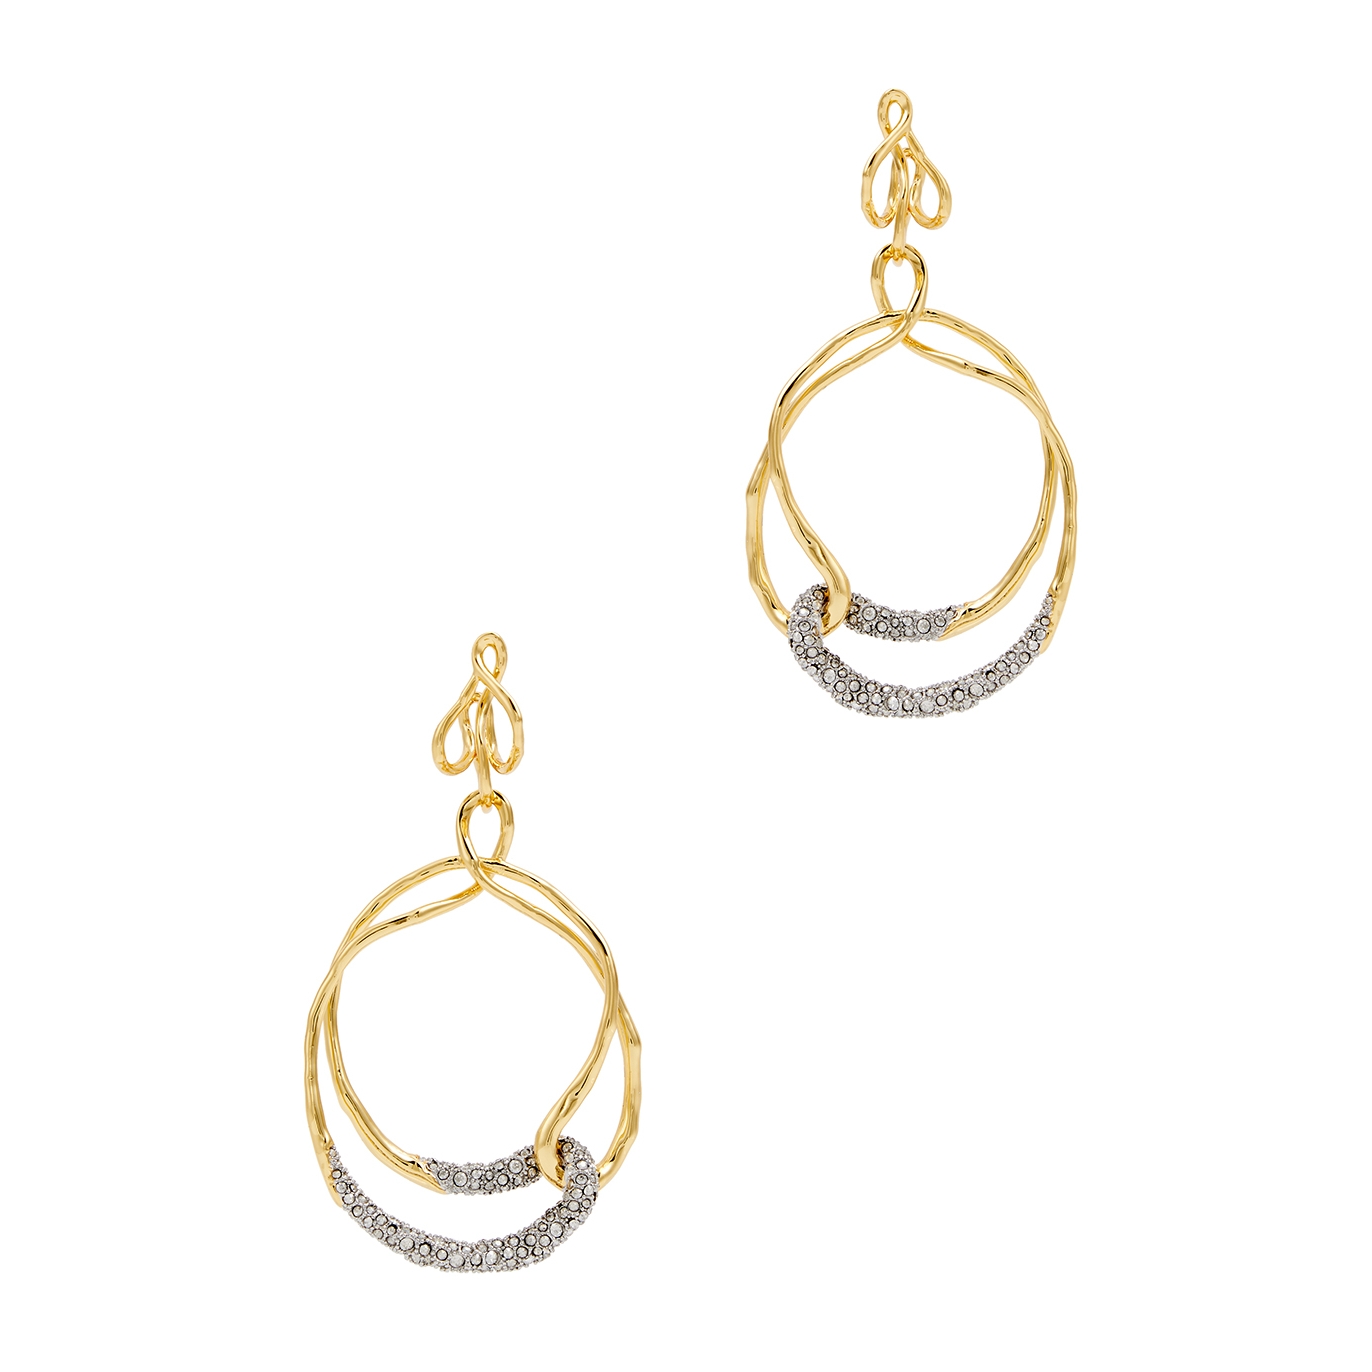 Alexis Bittar Solanales Embellished 14kt Gold-plated Earrings